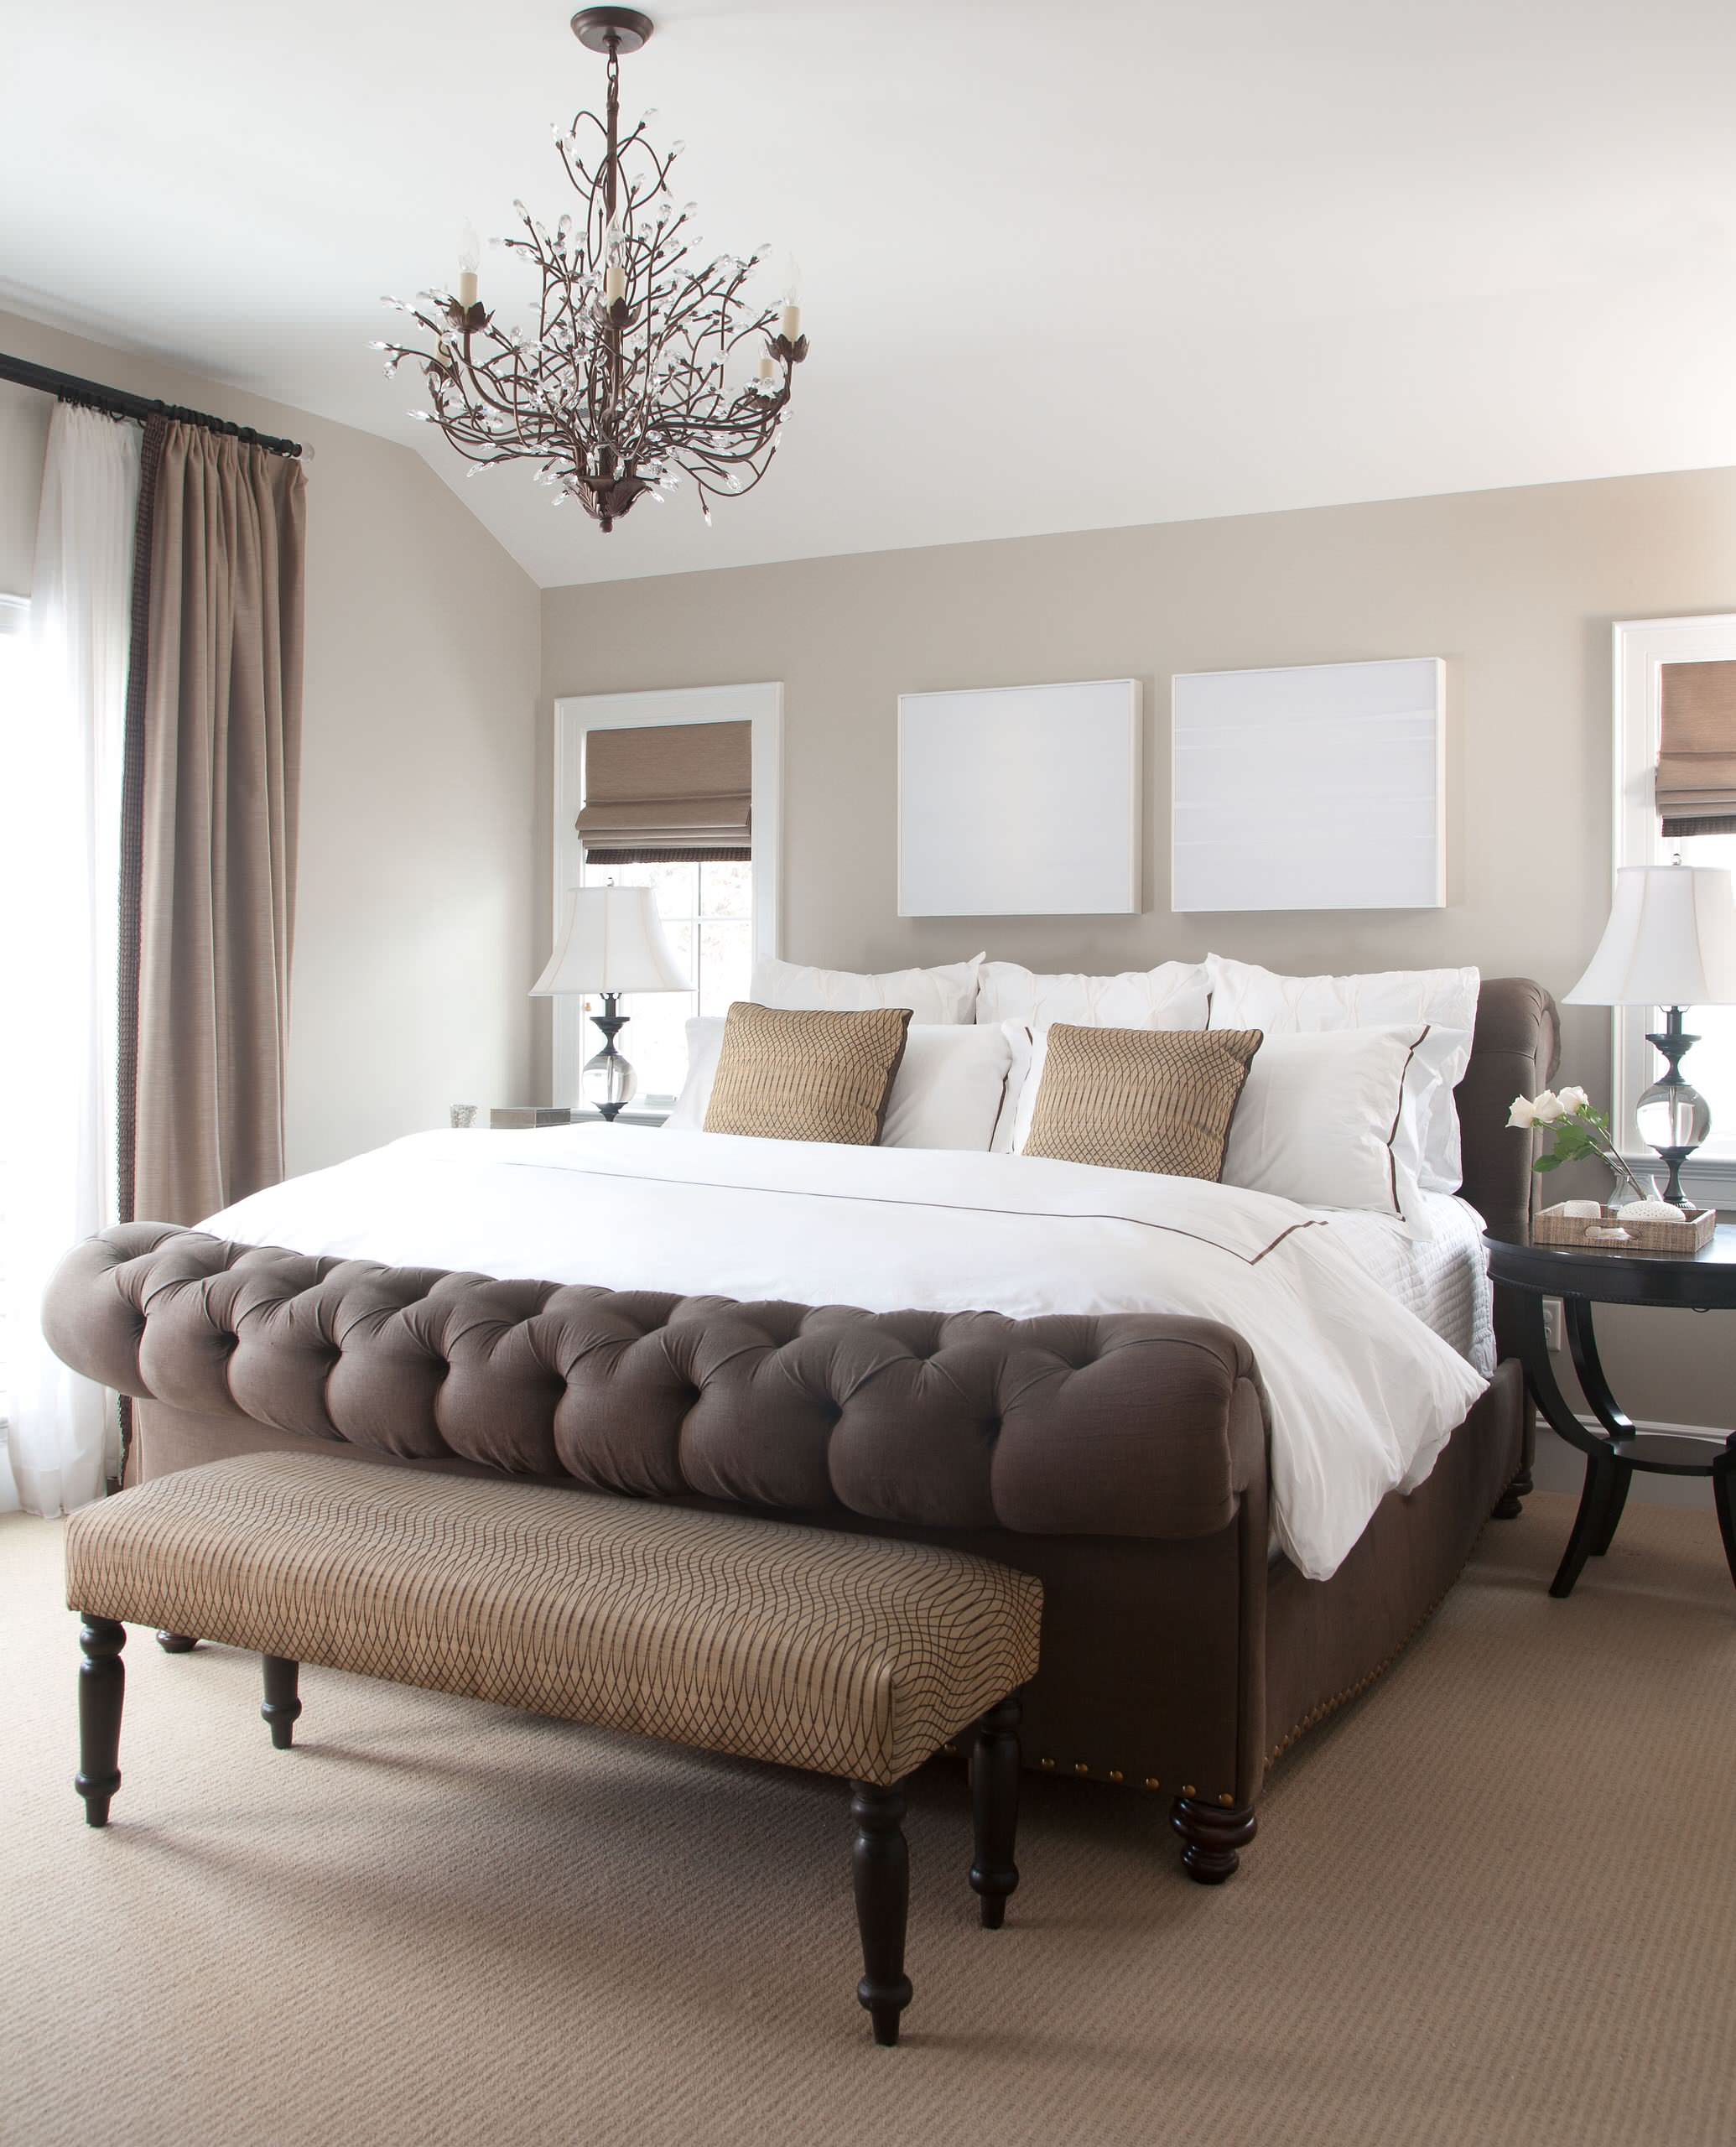 Small Bedroom King Bed - Photos & Ideas | Houzz